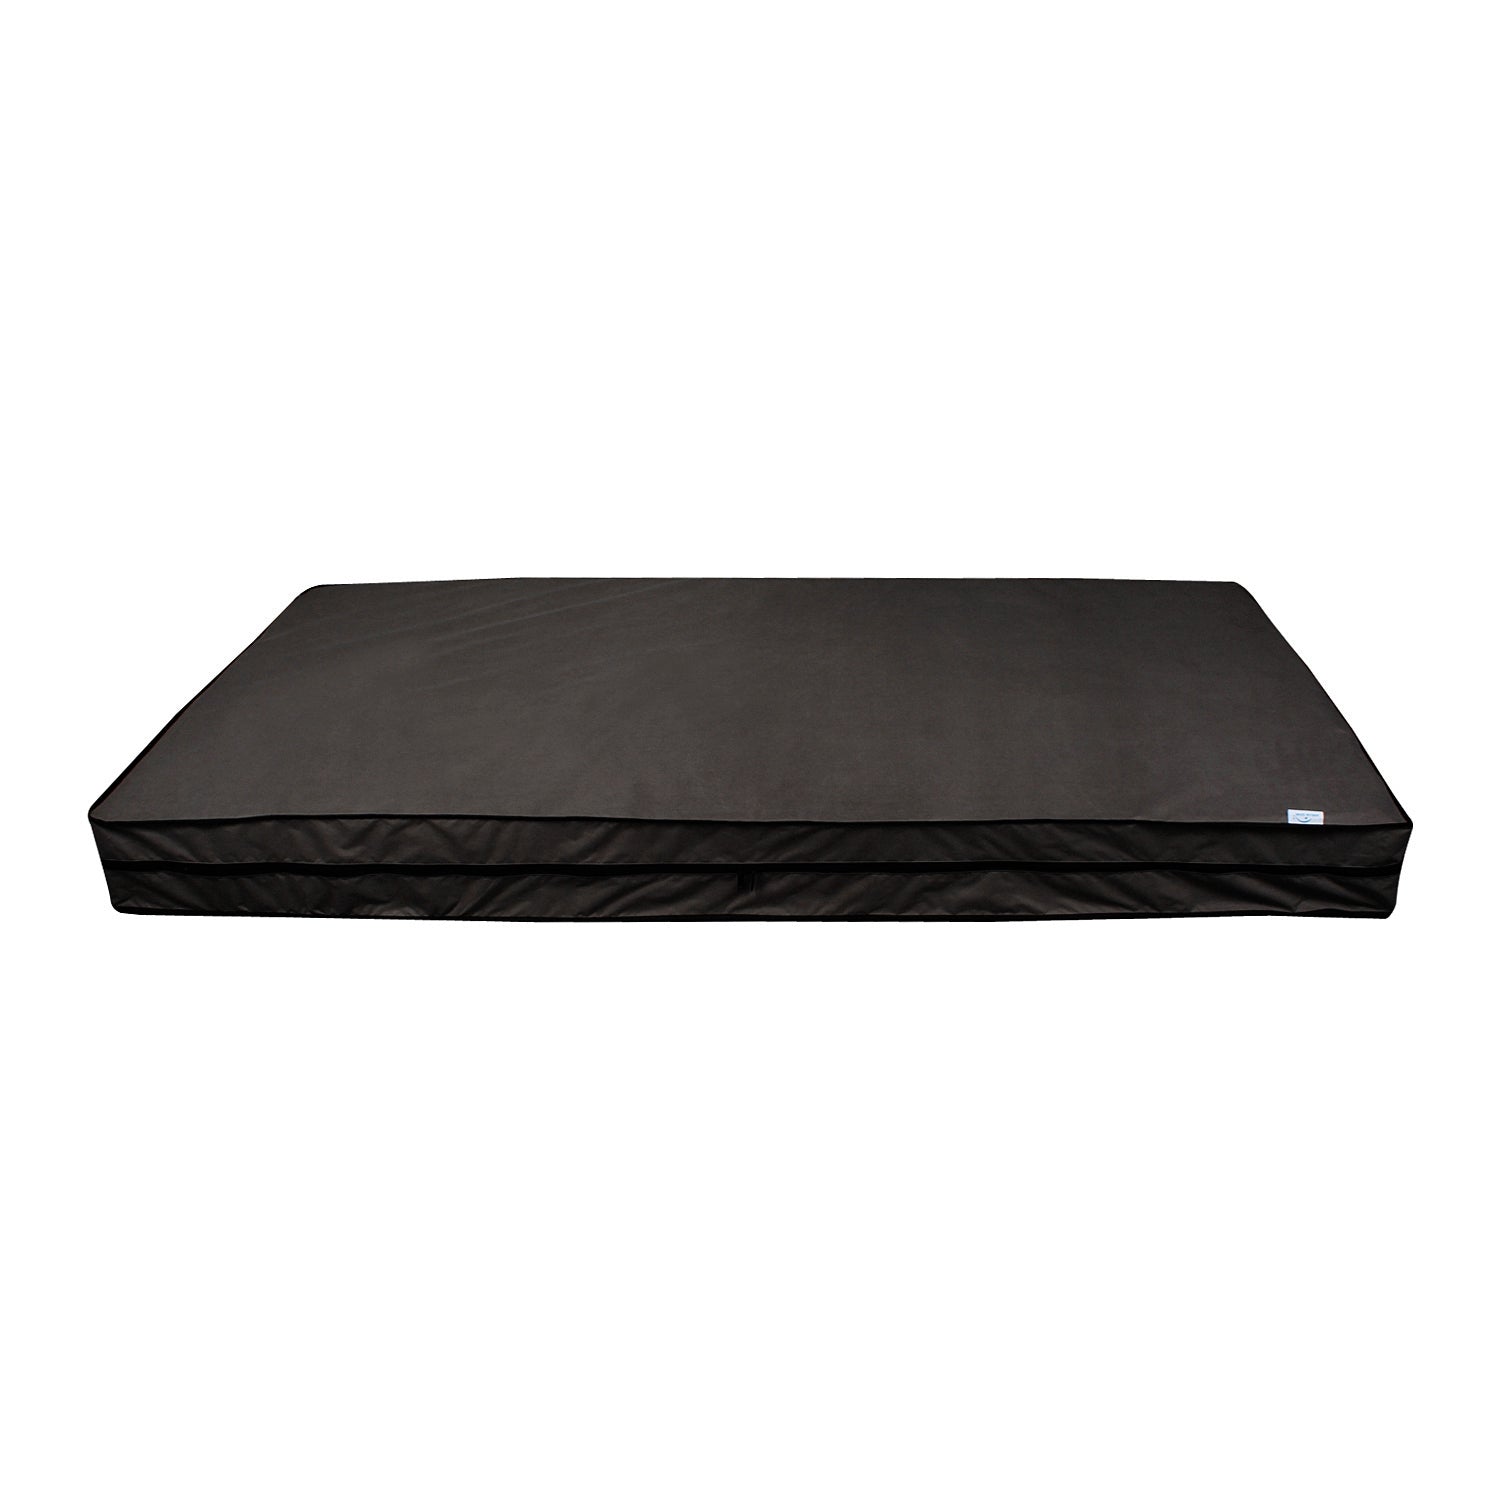 Waterproof Mattress Cover with Zipper, Mazestik Mattress Cover (Coffee, Available in 17 Sizes)